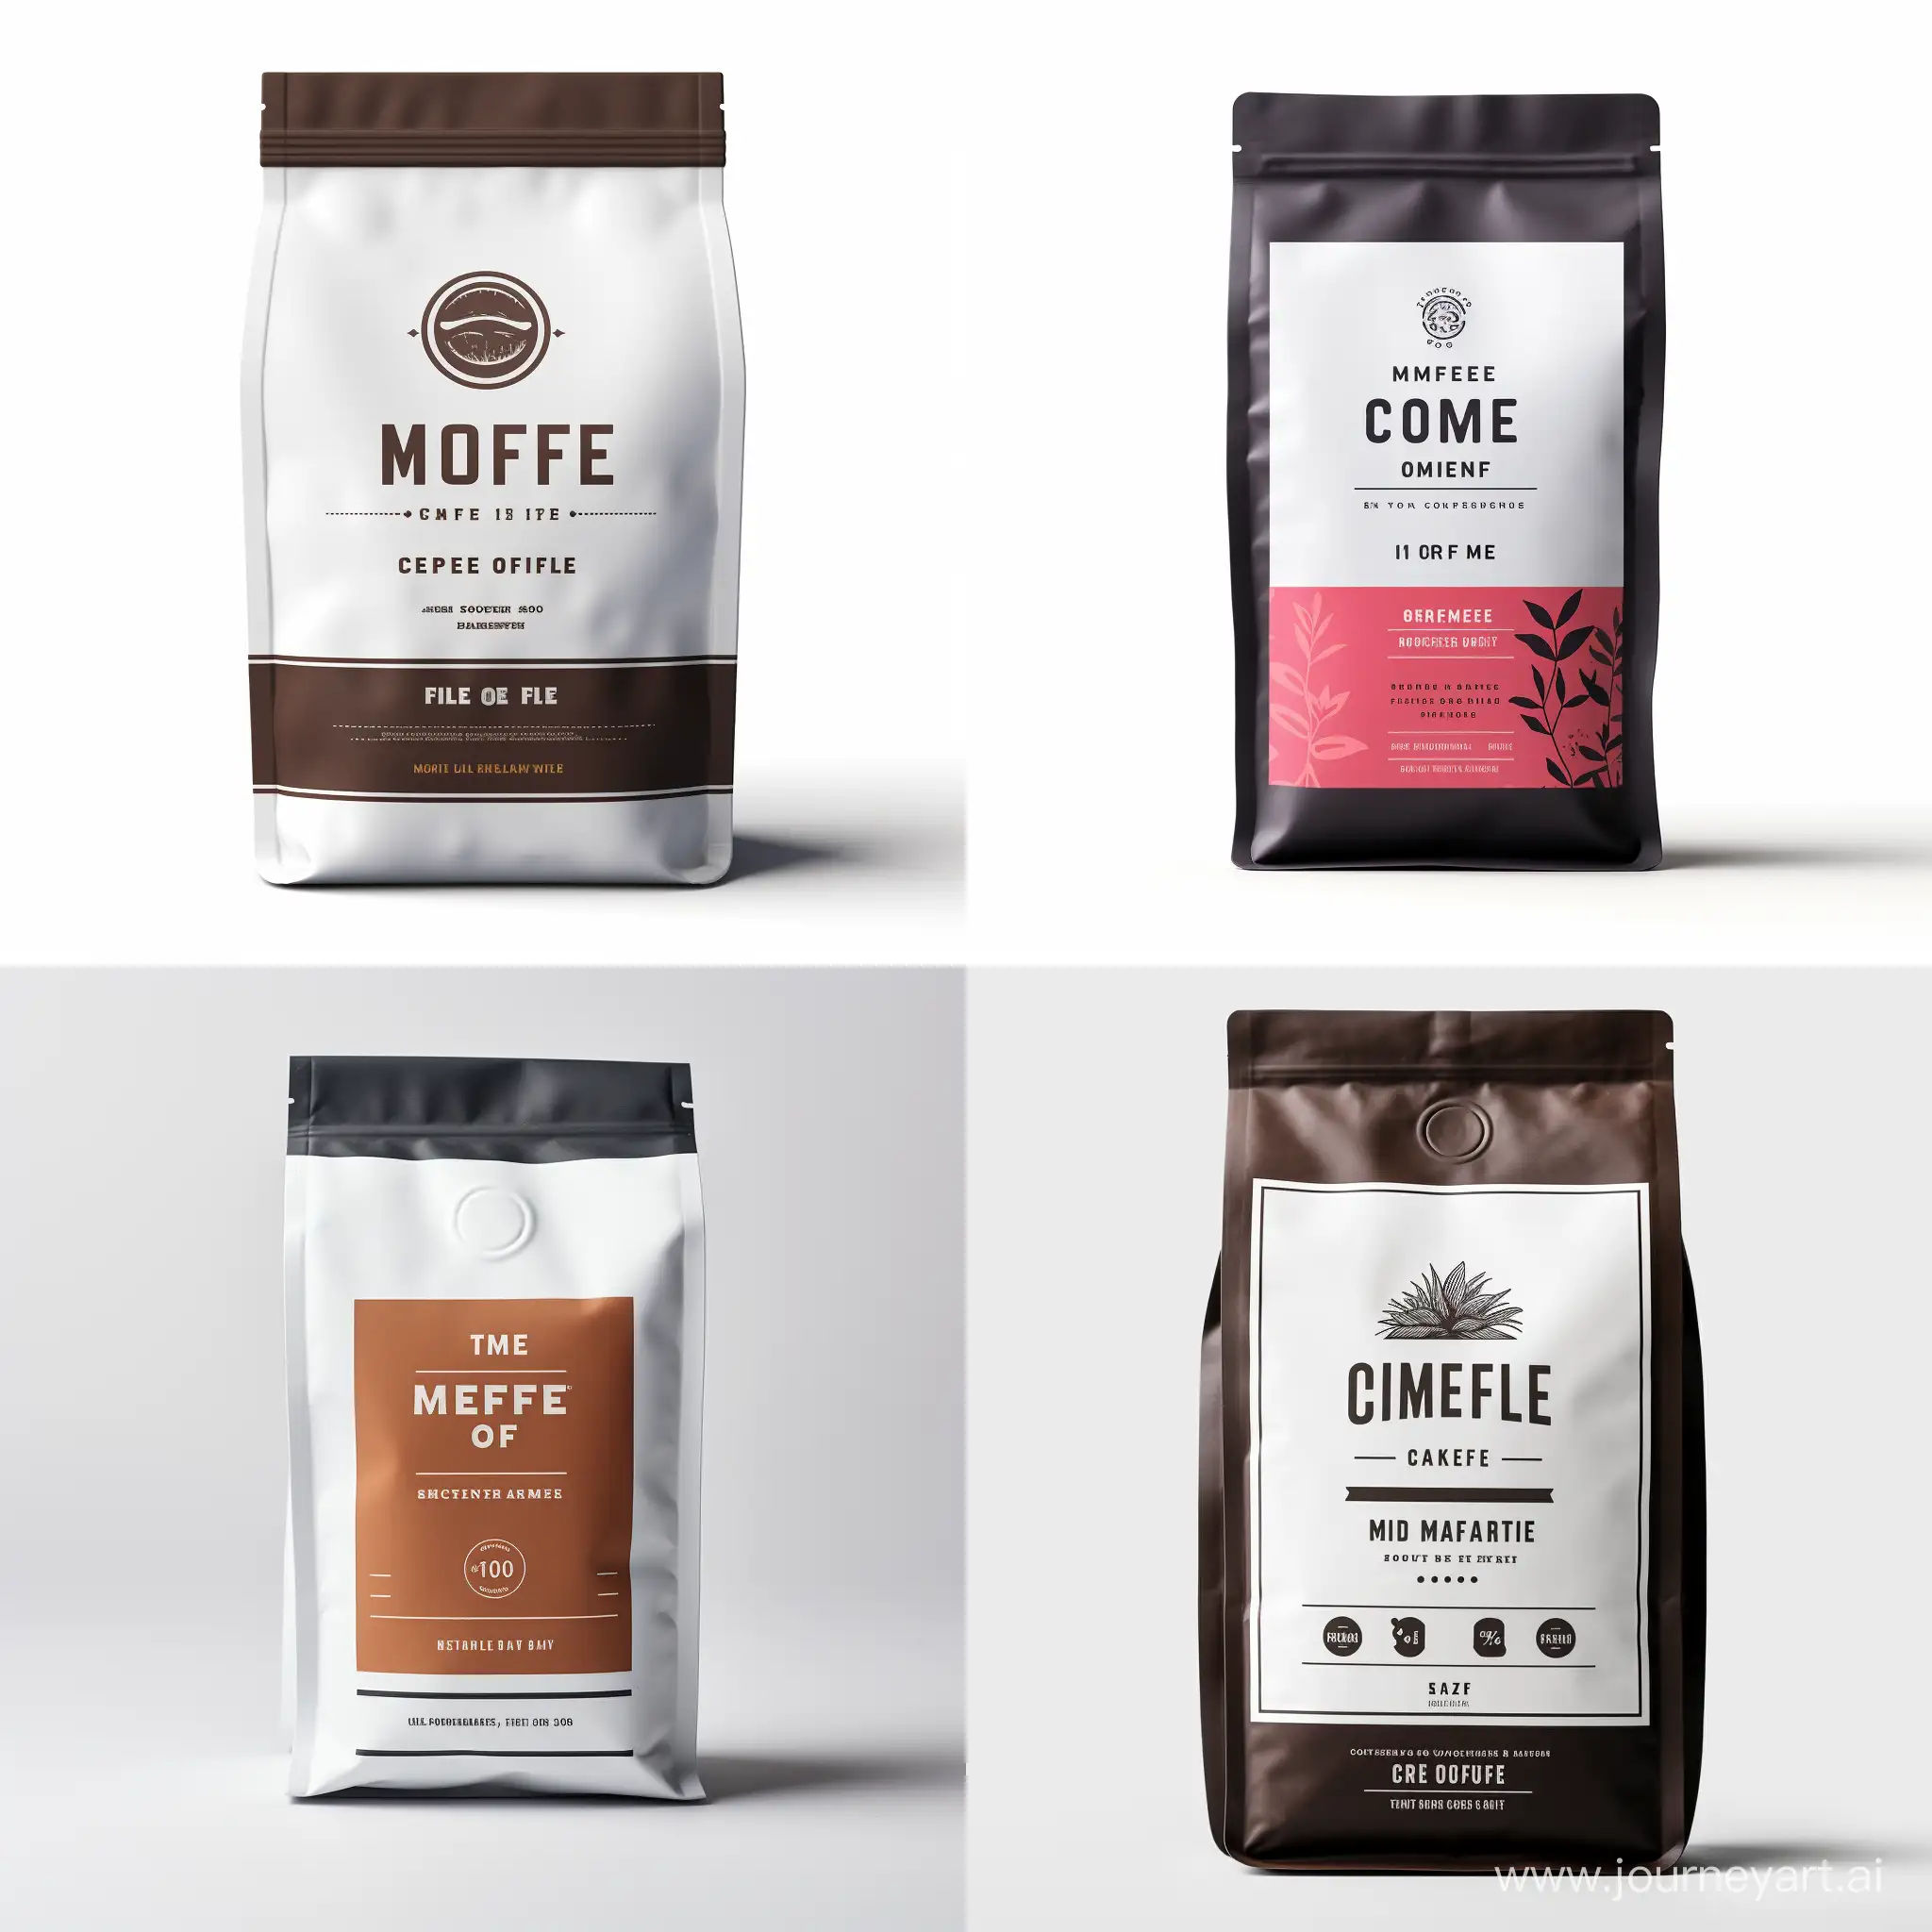 A coffee product packaging photo white background with custom brand name "Me Coffee"